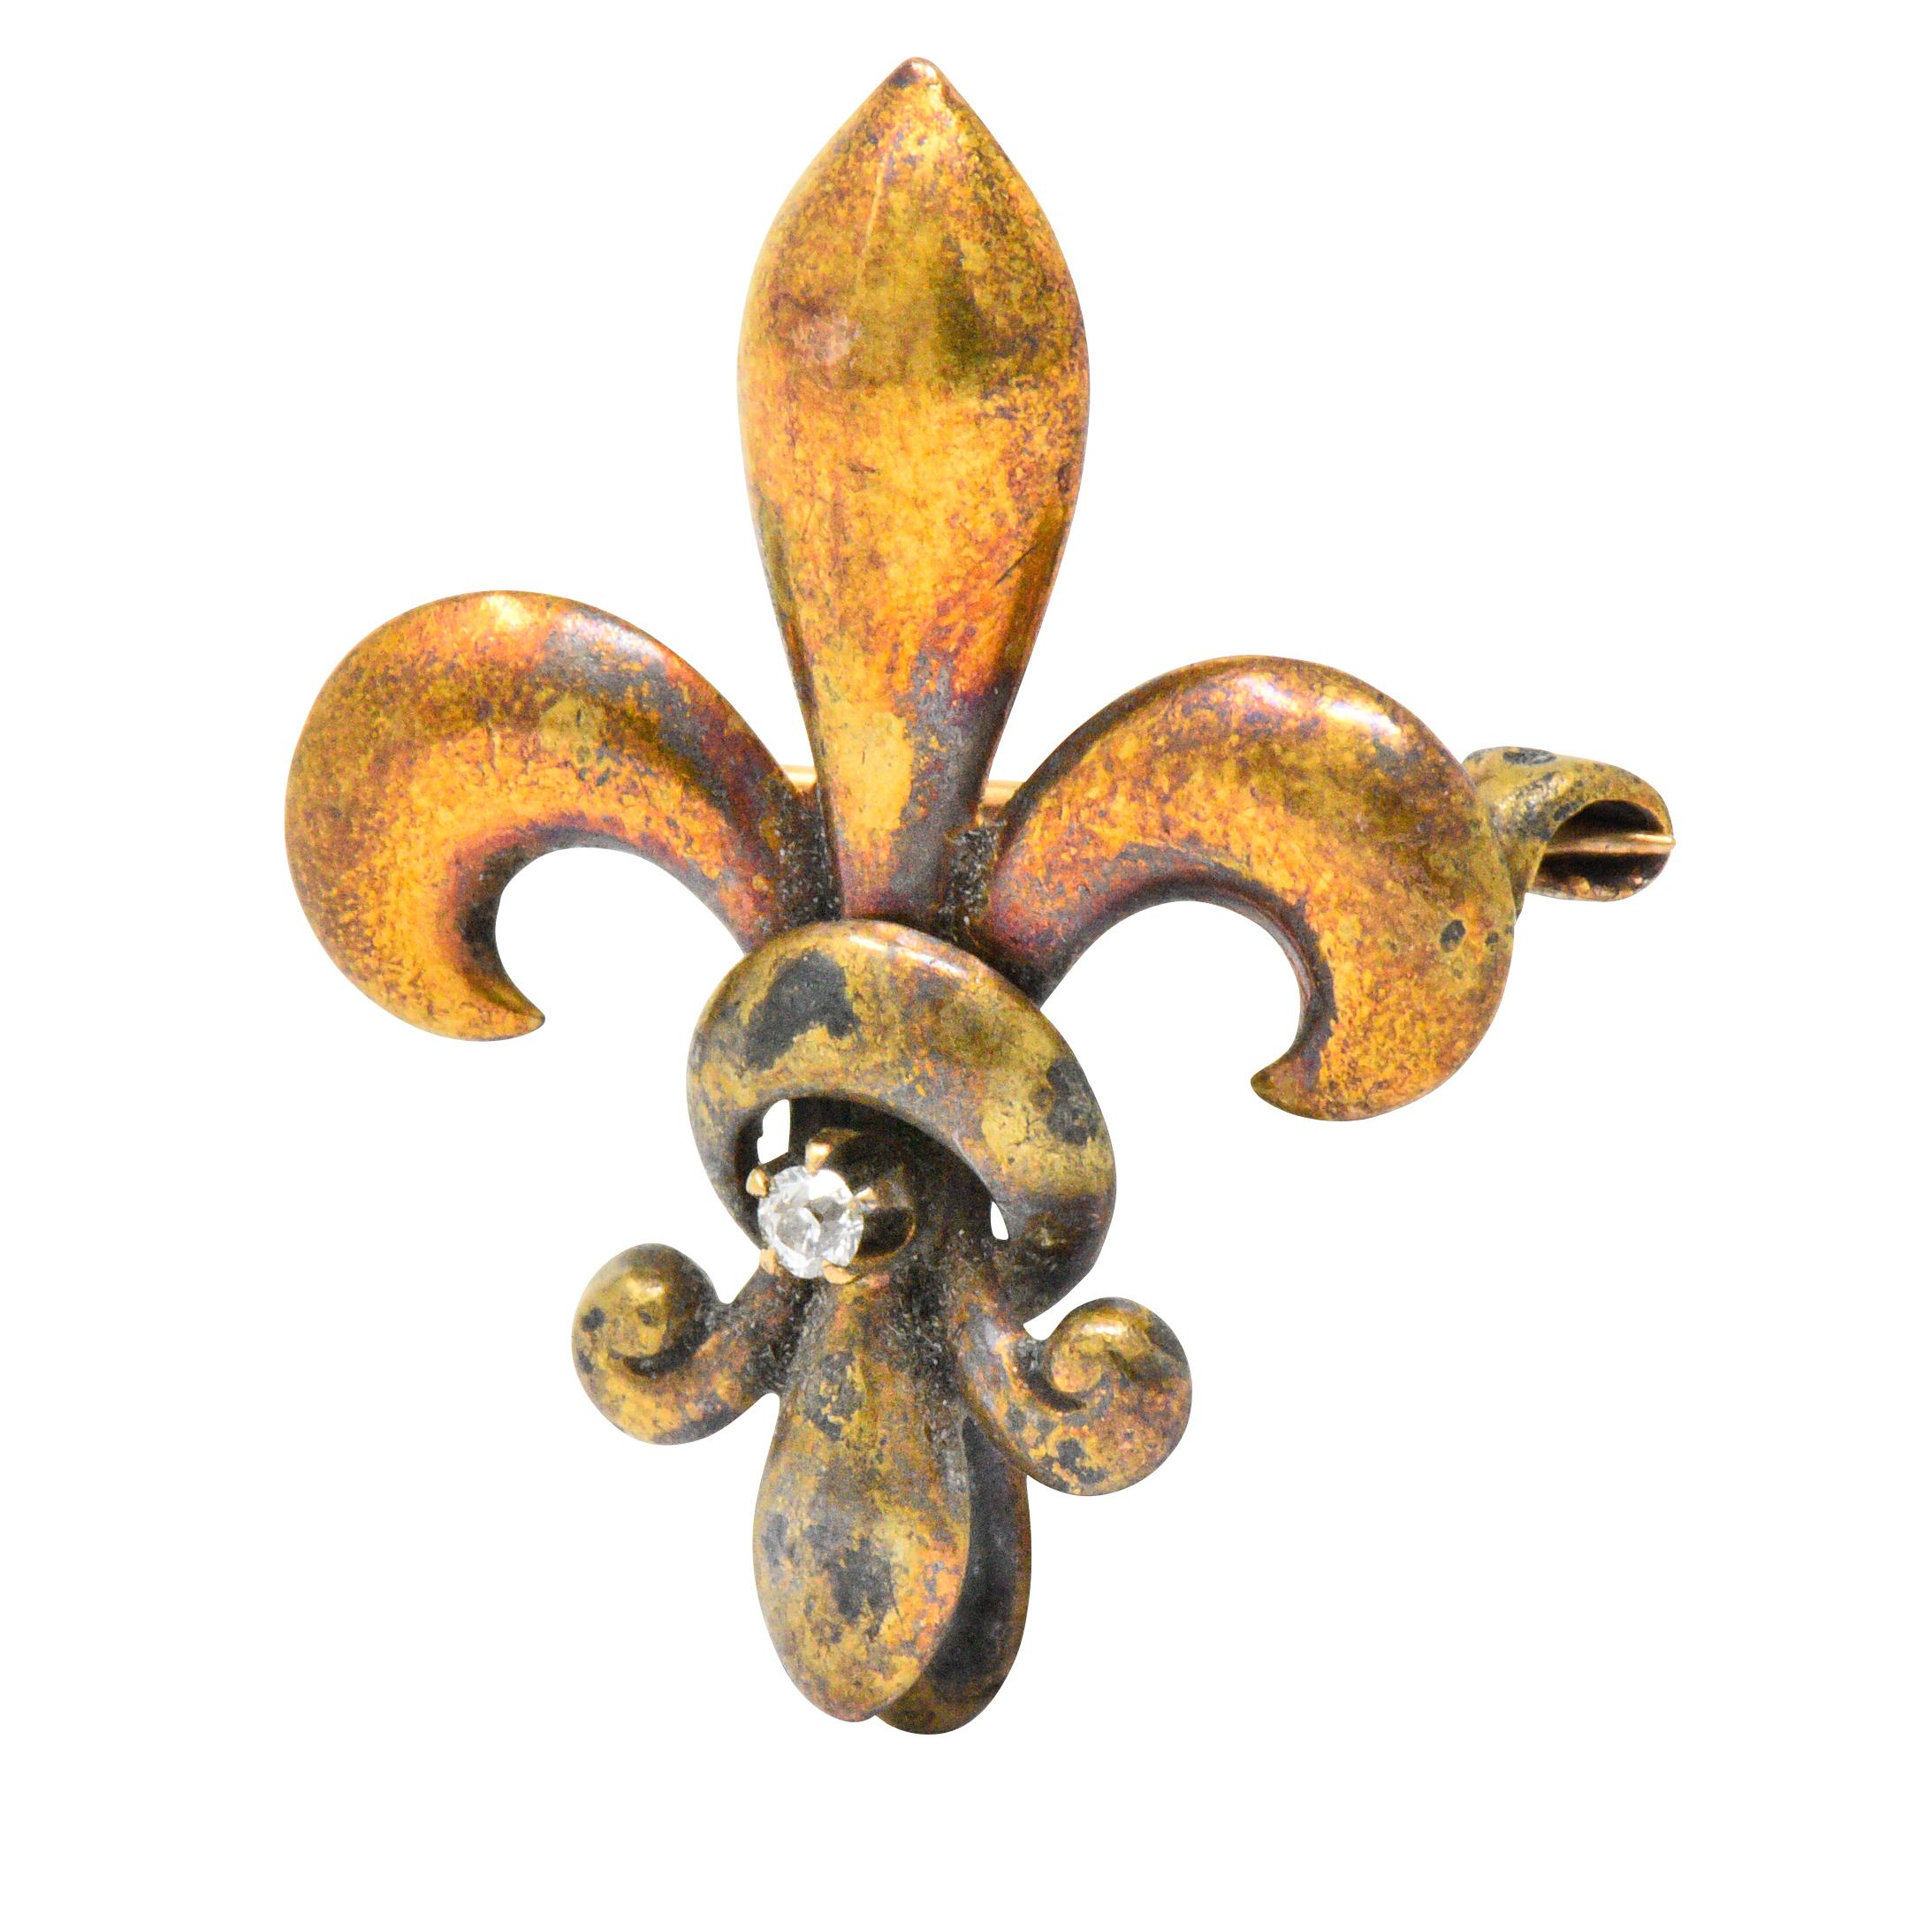 Centering an old European cut diamond weighing approximately 0.02 carats, eye-clean and white

Designed as a polished gold fleur-de-lis

Tested as 14k gold

Maker's mark for Kremetz and loop to suspend a drop

Measures: Approx. 1 x 3/4 Inch

Total